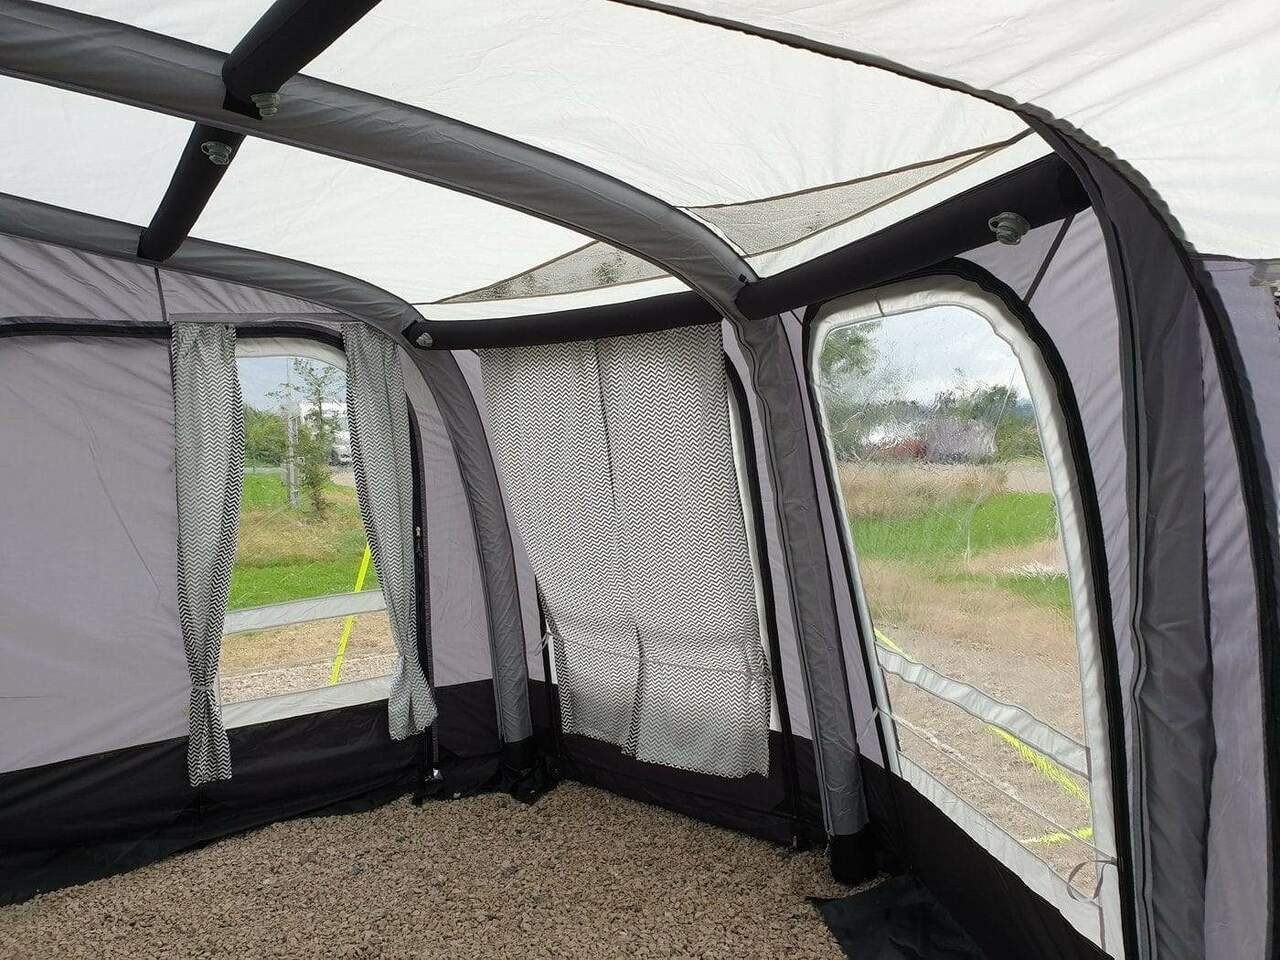 OLPRO View 300 Caravan Inflatable Porch Awning With Porch Extension